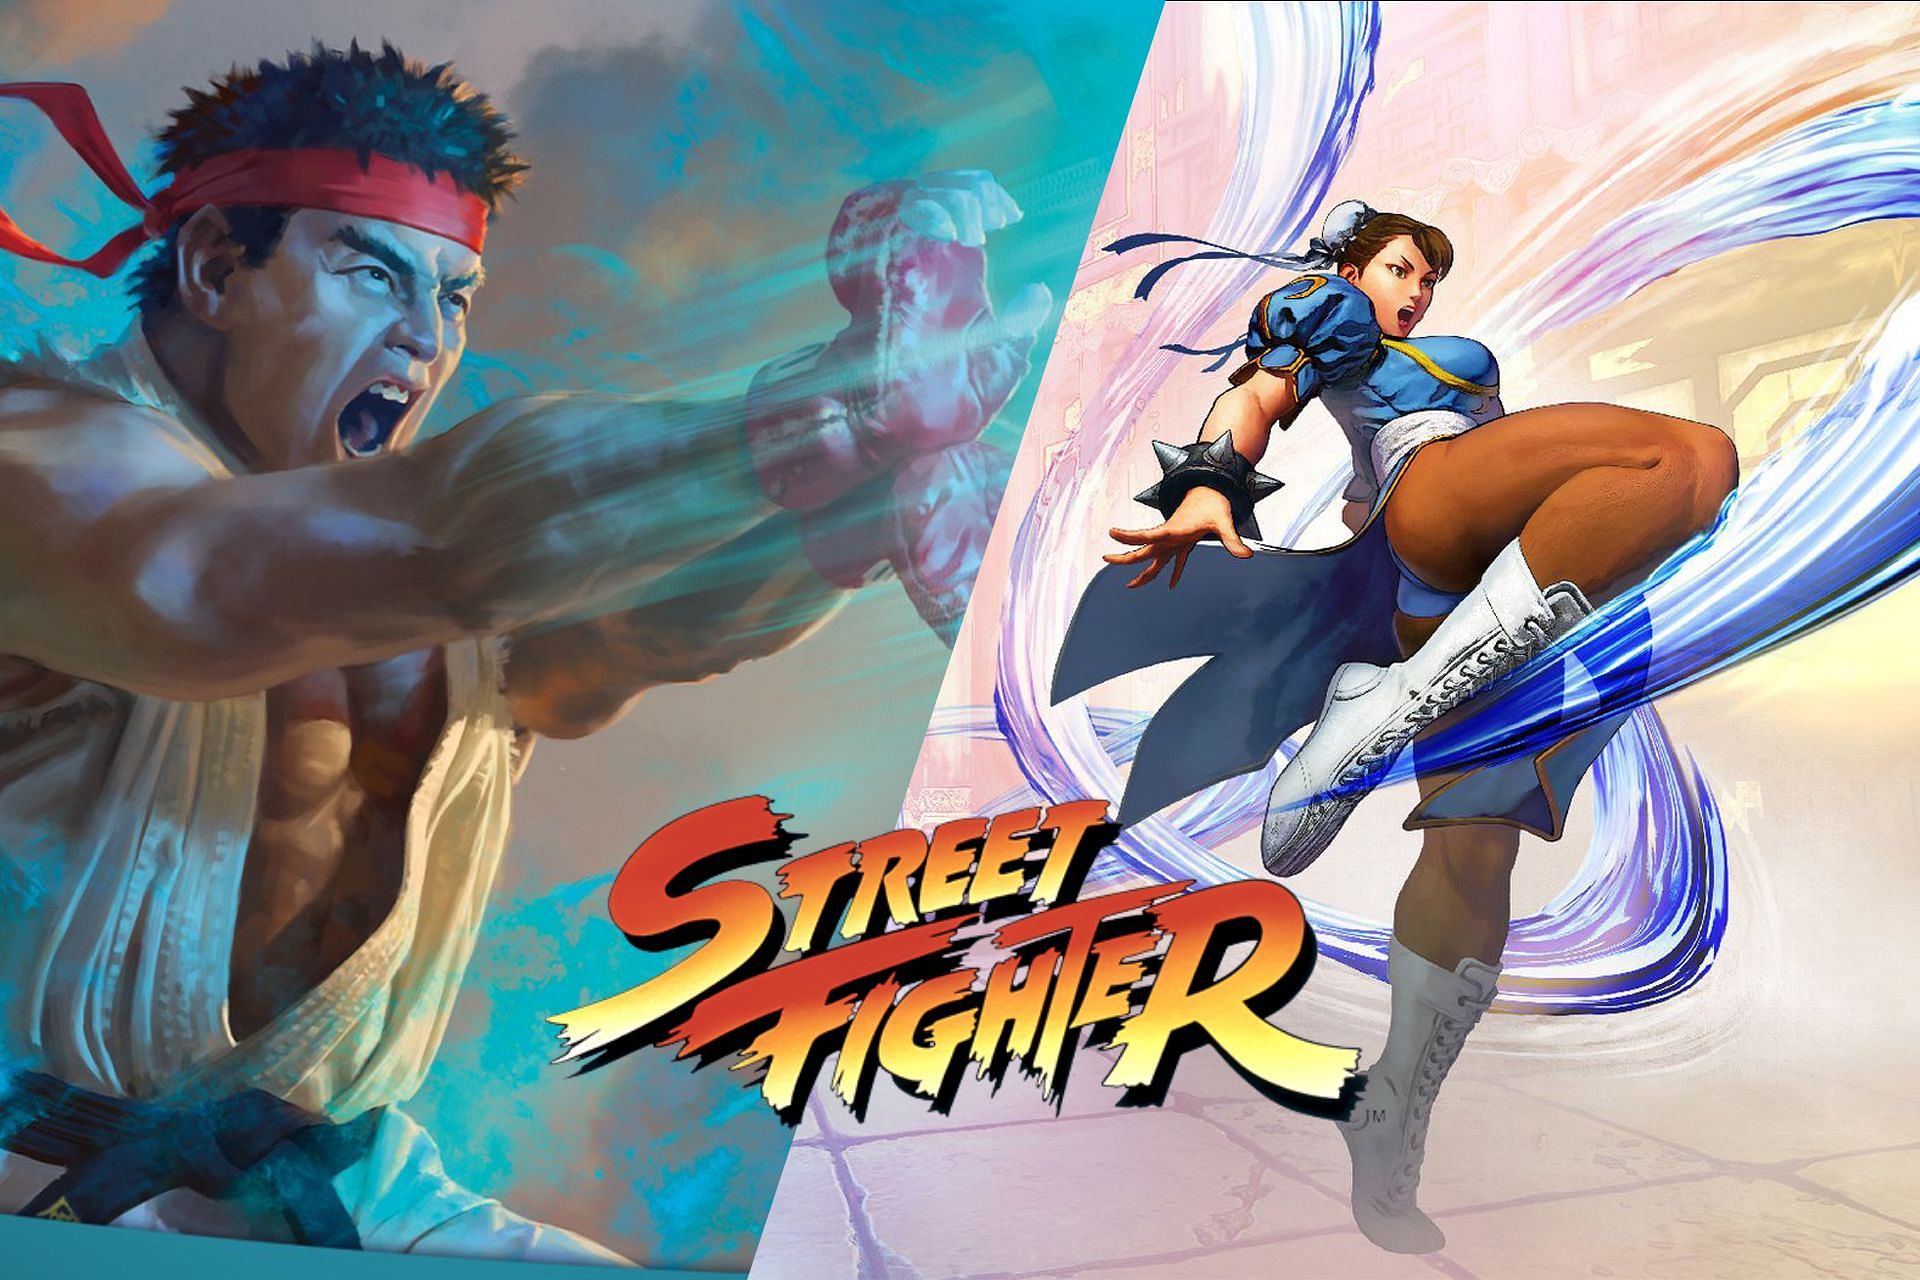 Magic: the Gathering is combining with Street Fighter for a limited-release drop of content (Image via Wizards of the Coast and Capcom)